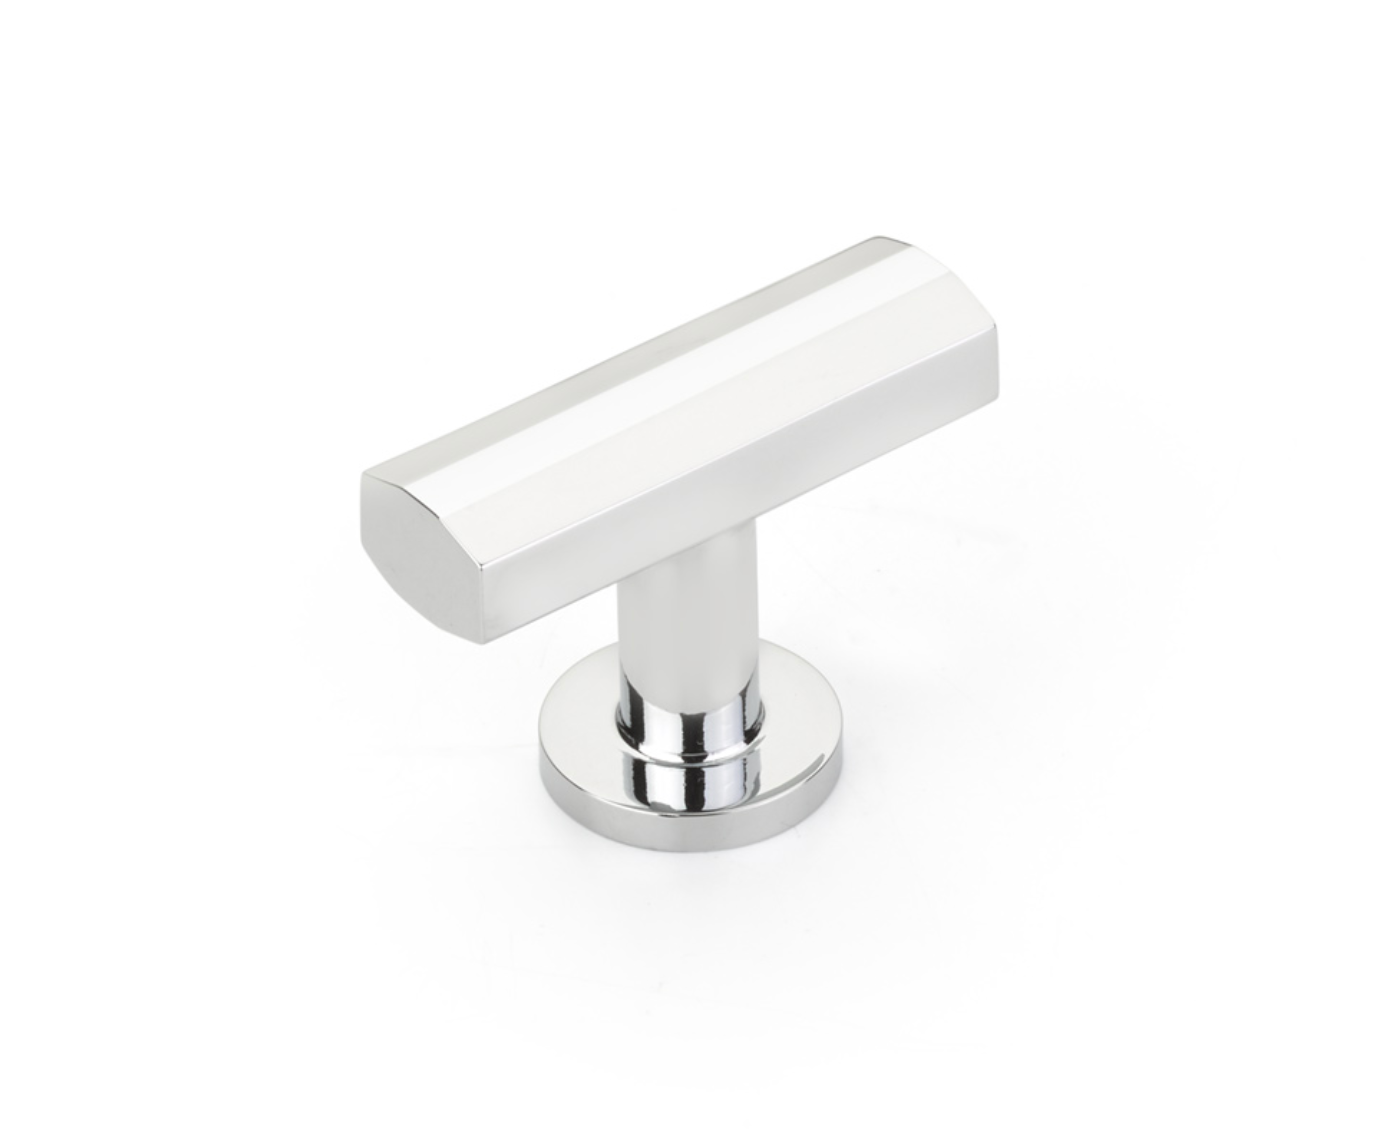 Polished Chrome "Heather" T-Bar Cabinet Knobs and Drawer Pulls